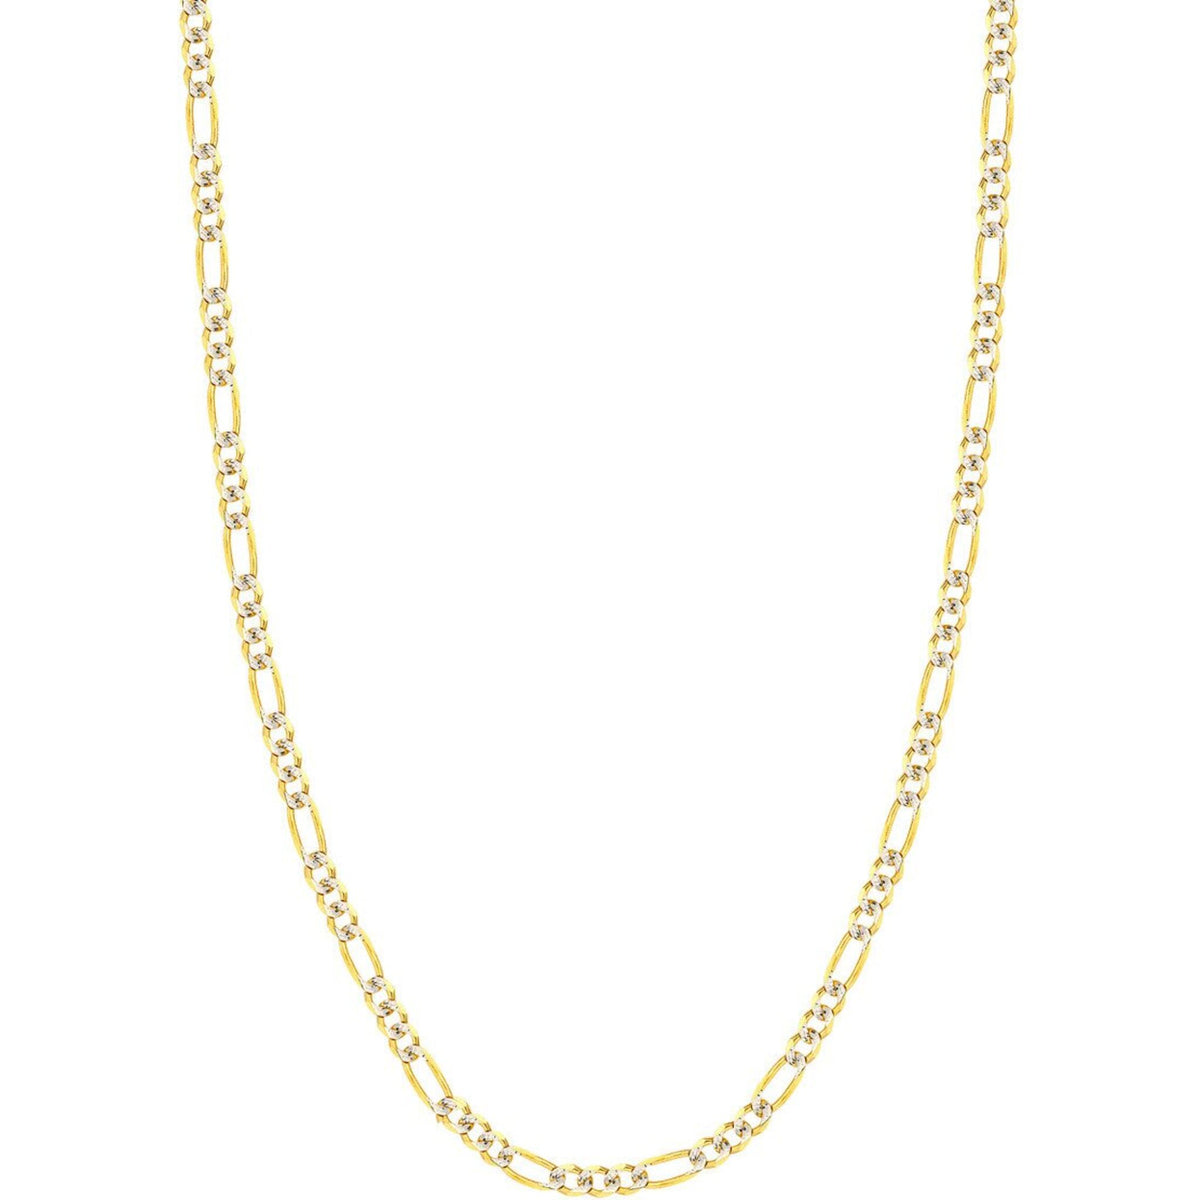 Olas d'Oro 18" Necklace - 14K Yellow/White Gold 4.75mm Two-Tone Pave Figaro Chain with Lobster Lock